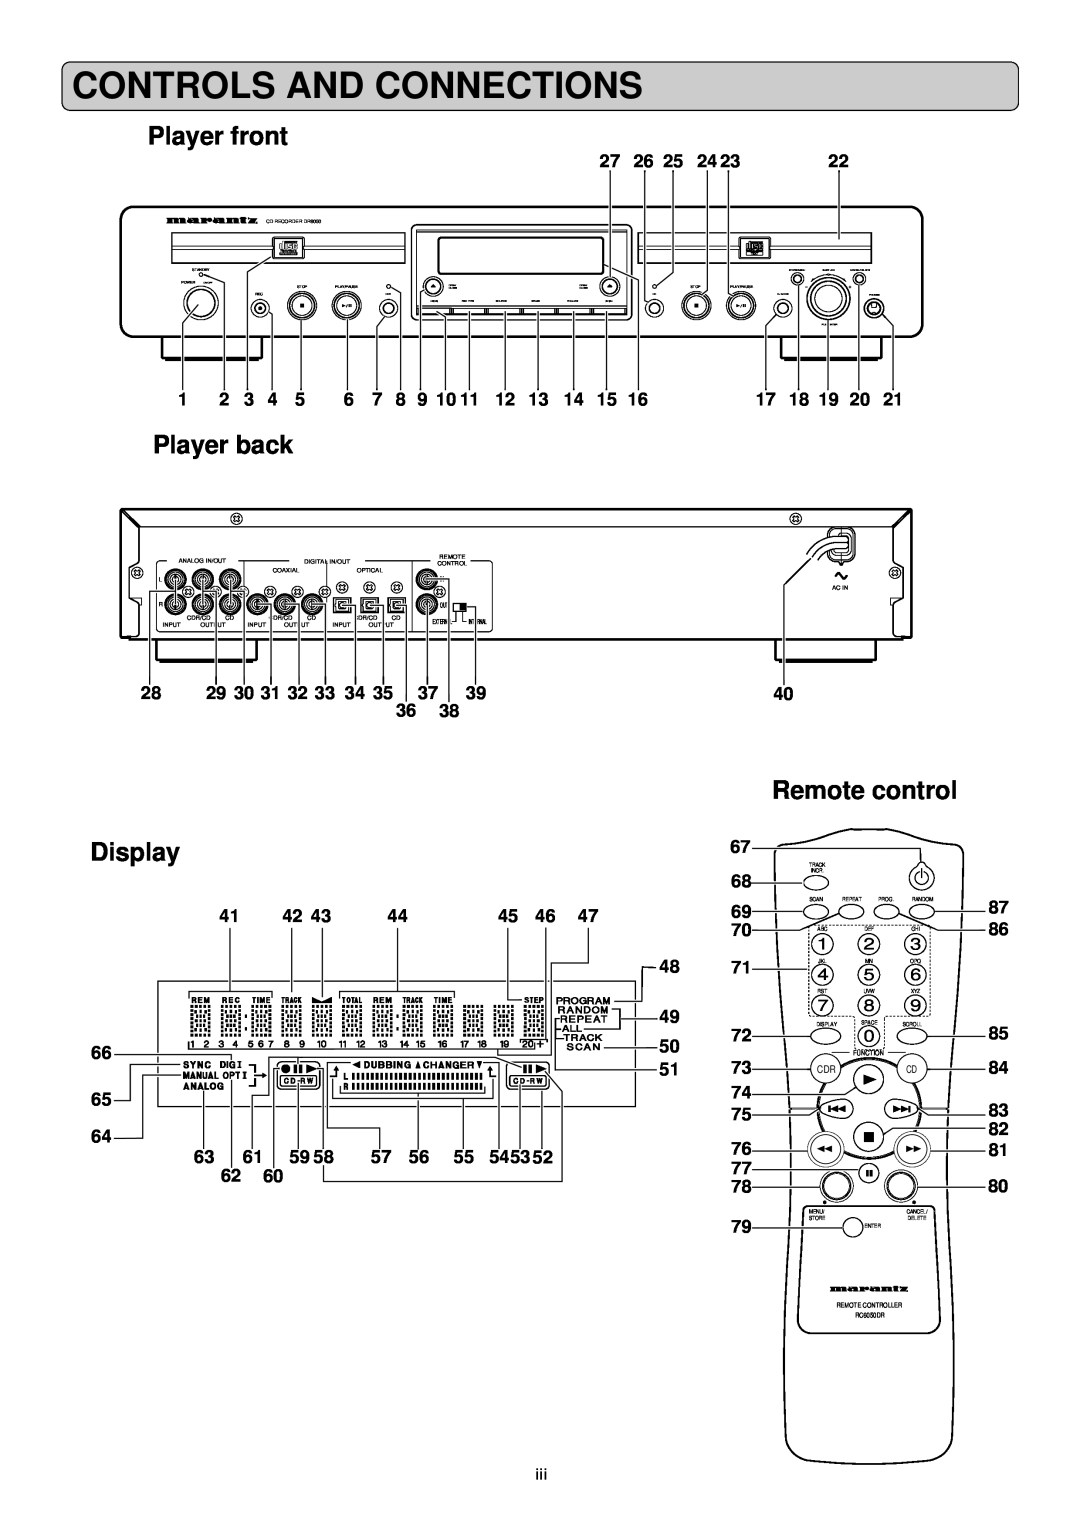 Marantz DR6050 manual Controls And Connections, Player front, Player back, Display, Remote control 